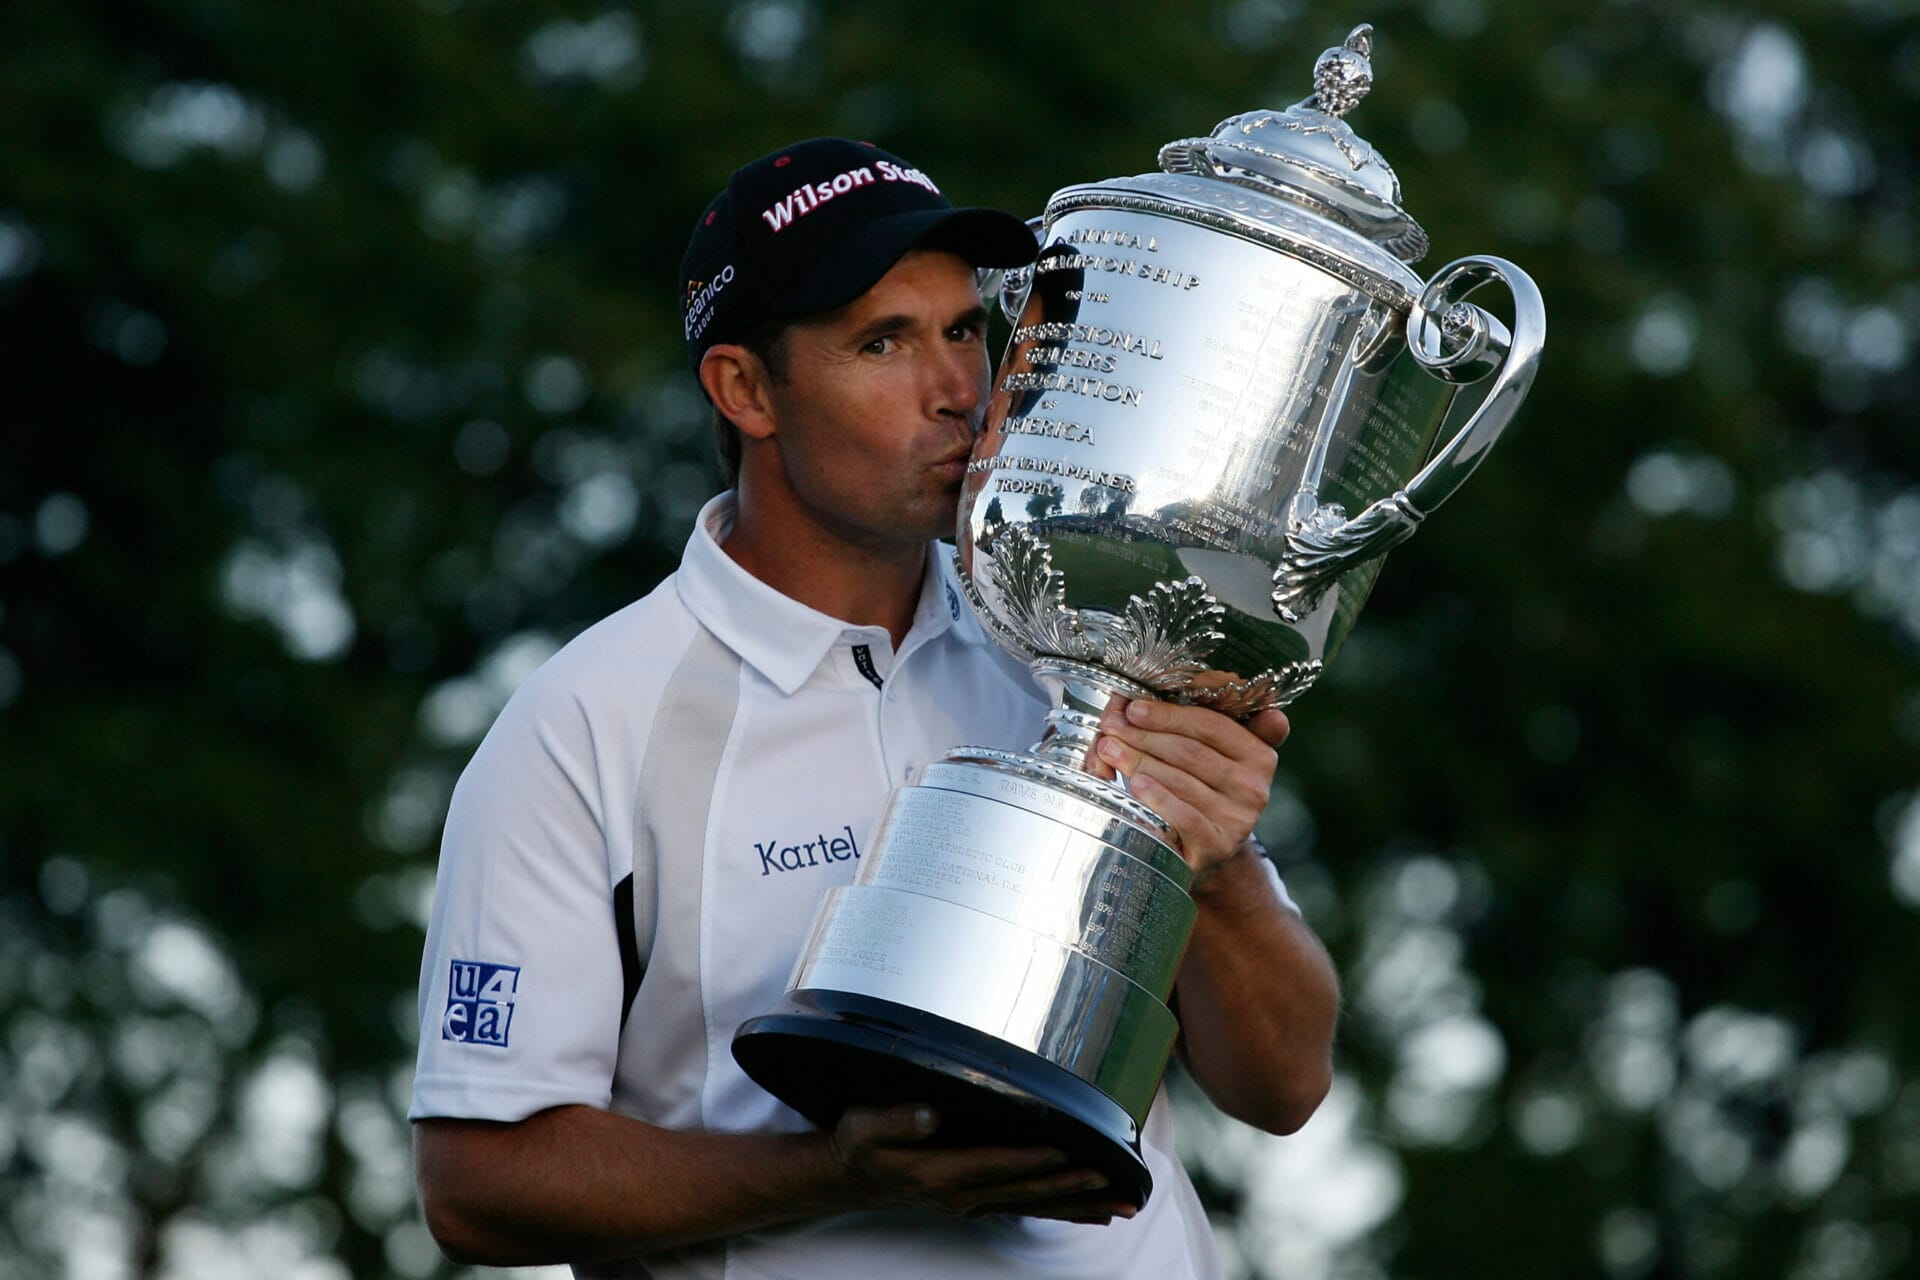 10 years on, Harrington is ready for another crack at The PGA